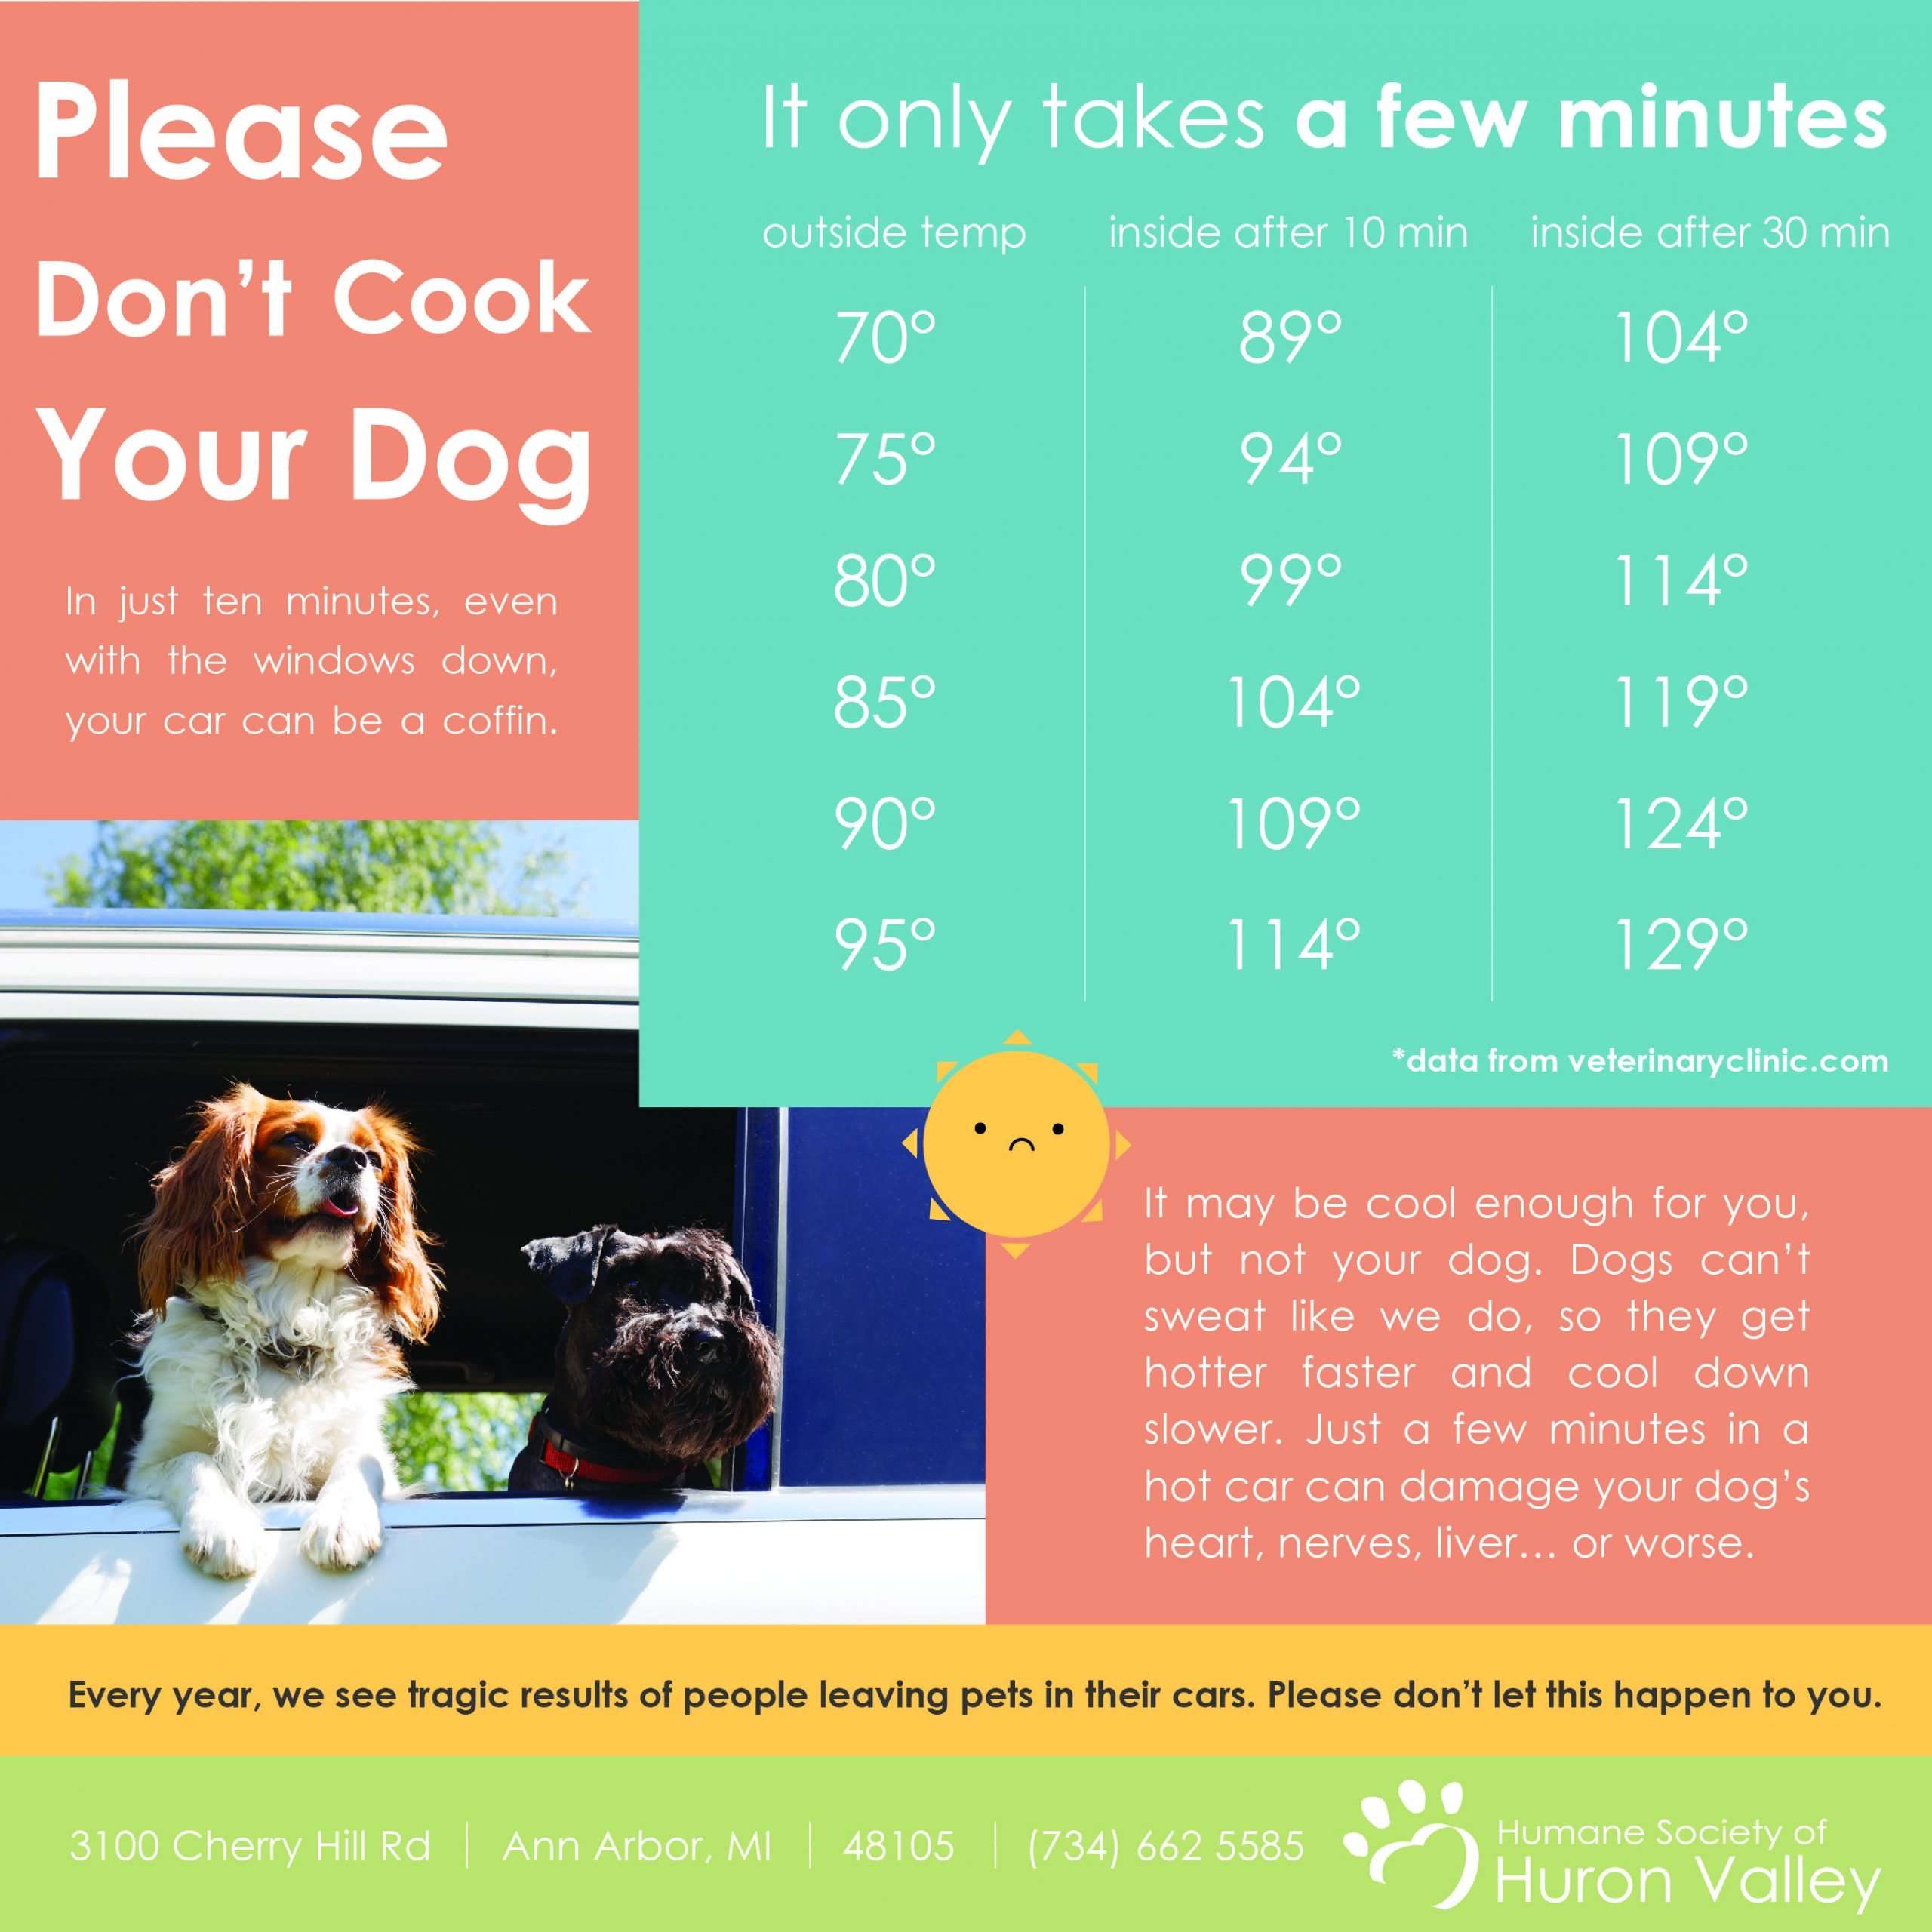 Hot days, but please not hot dogs! Dogs don